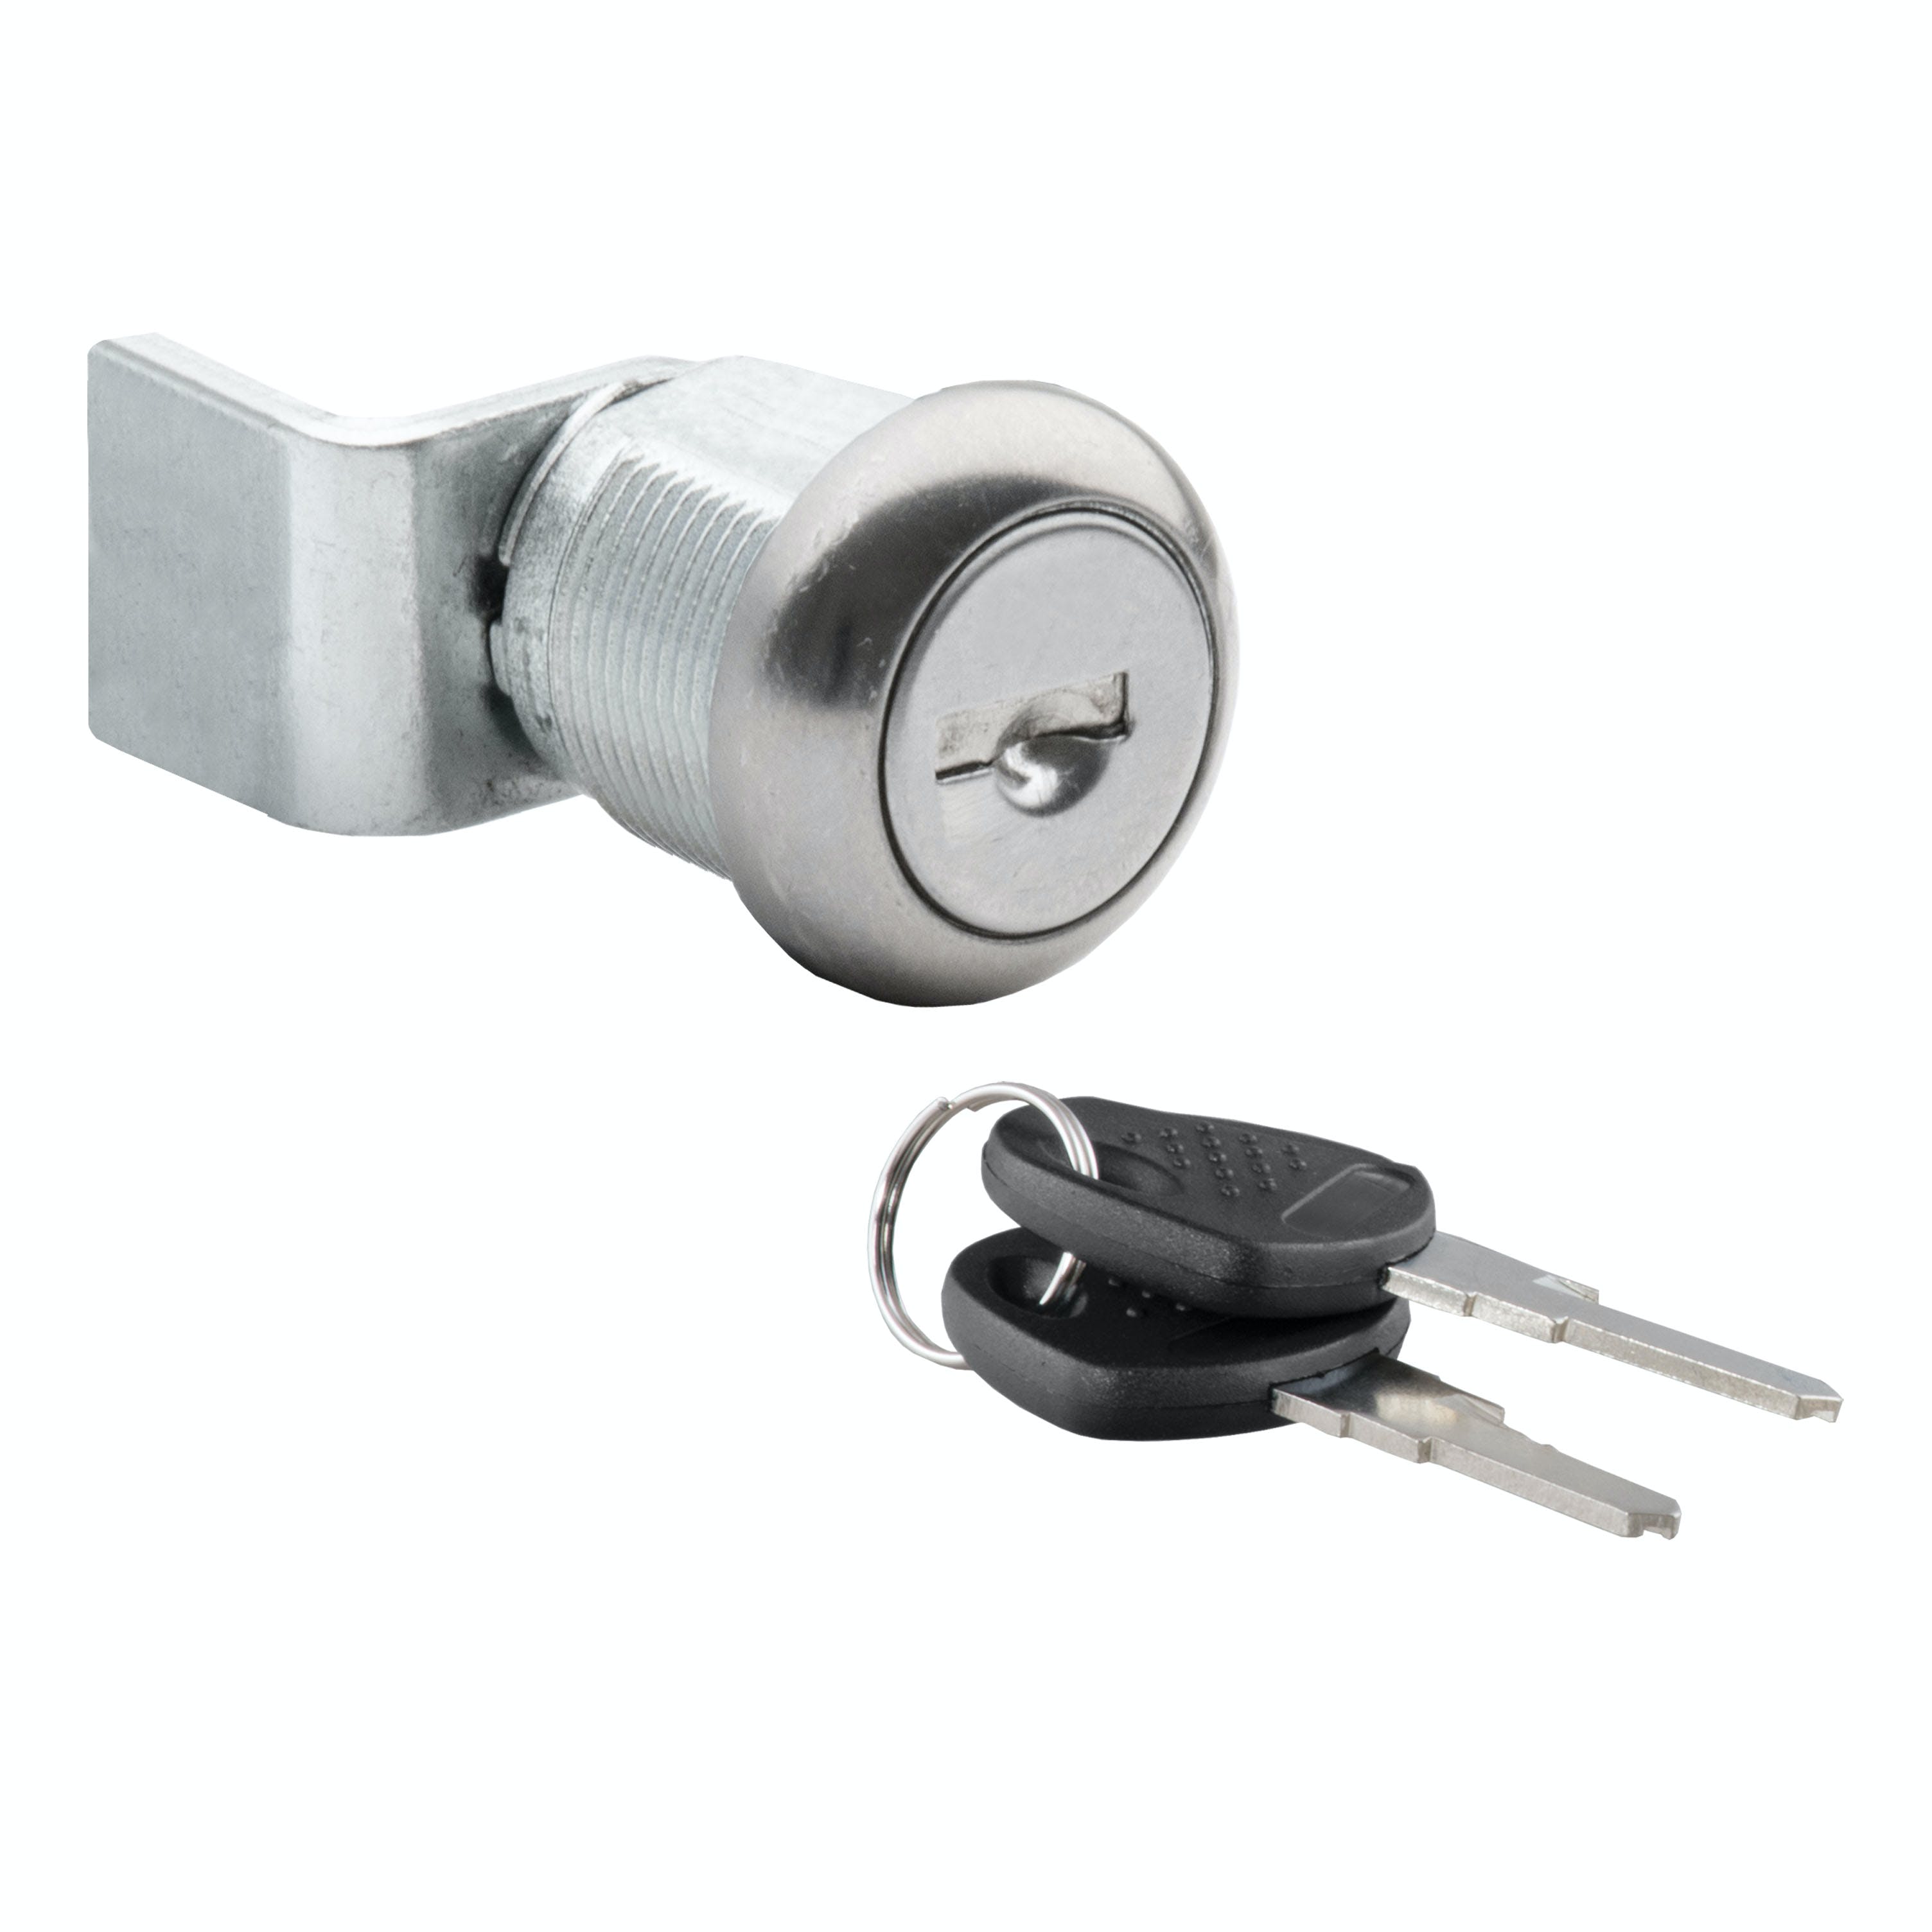 UWS 003-RYTHCY-008 Replacement T-Handle Lock Cylinder and Keys